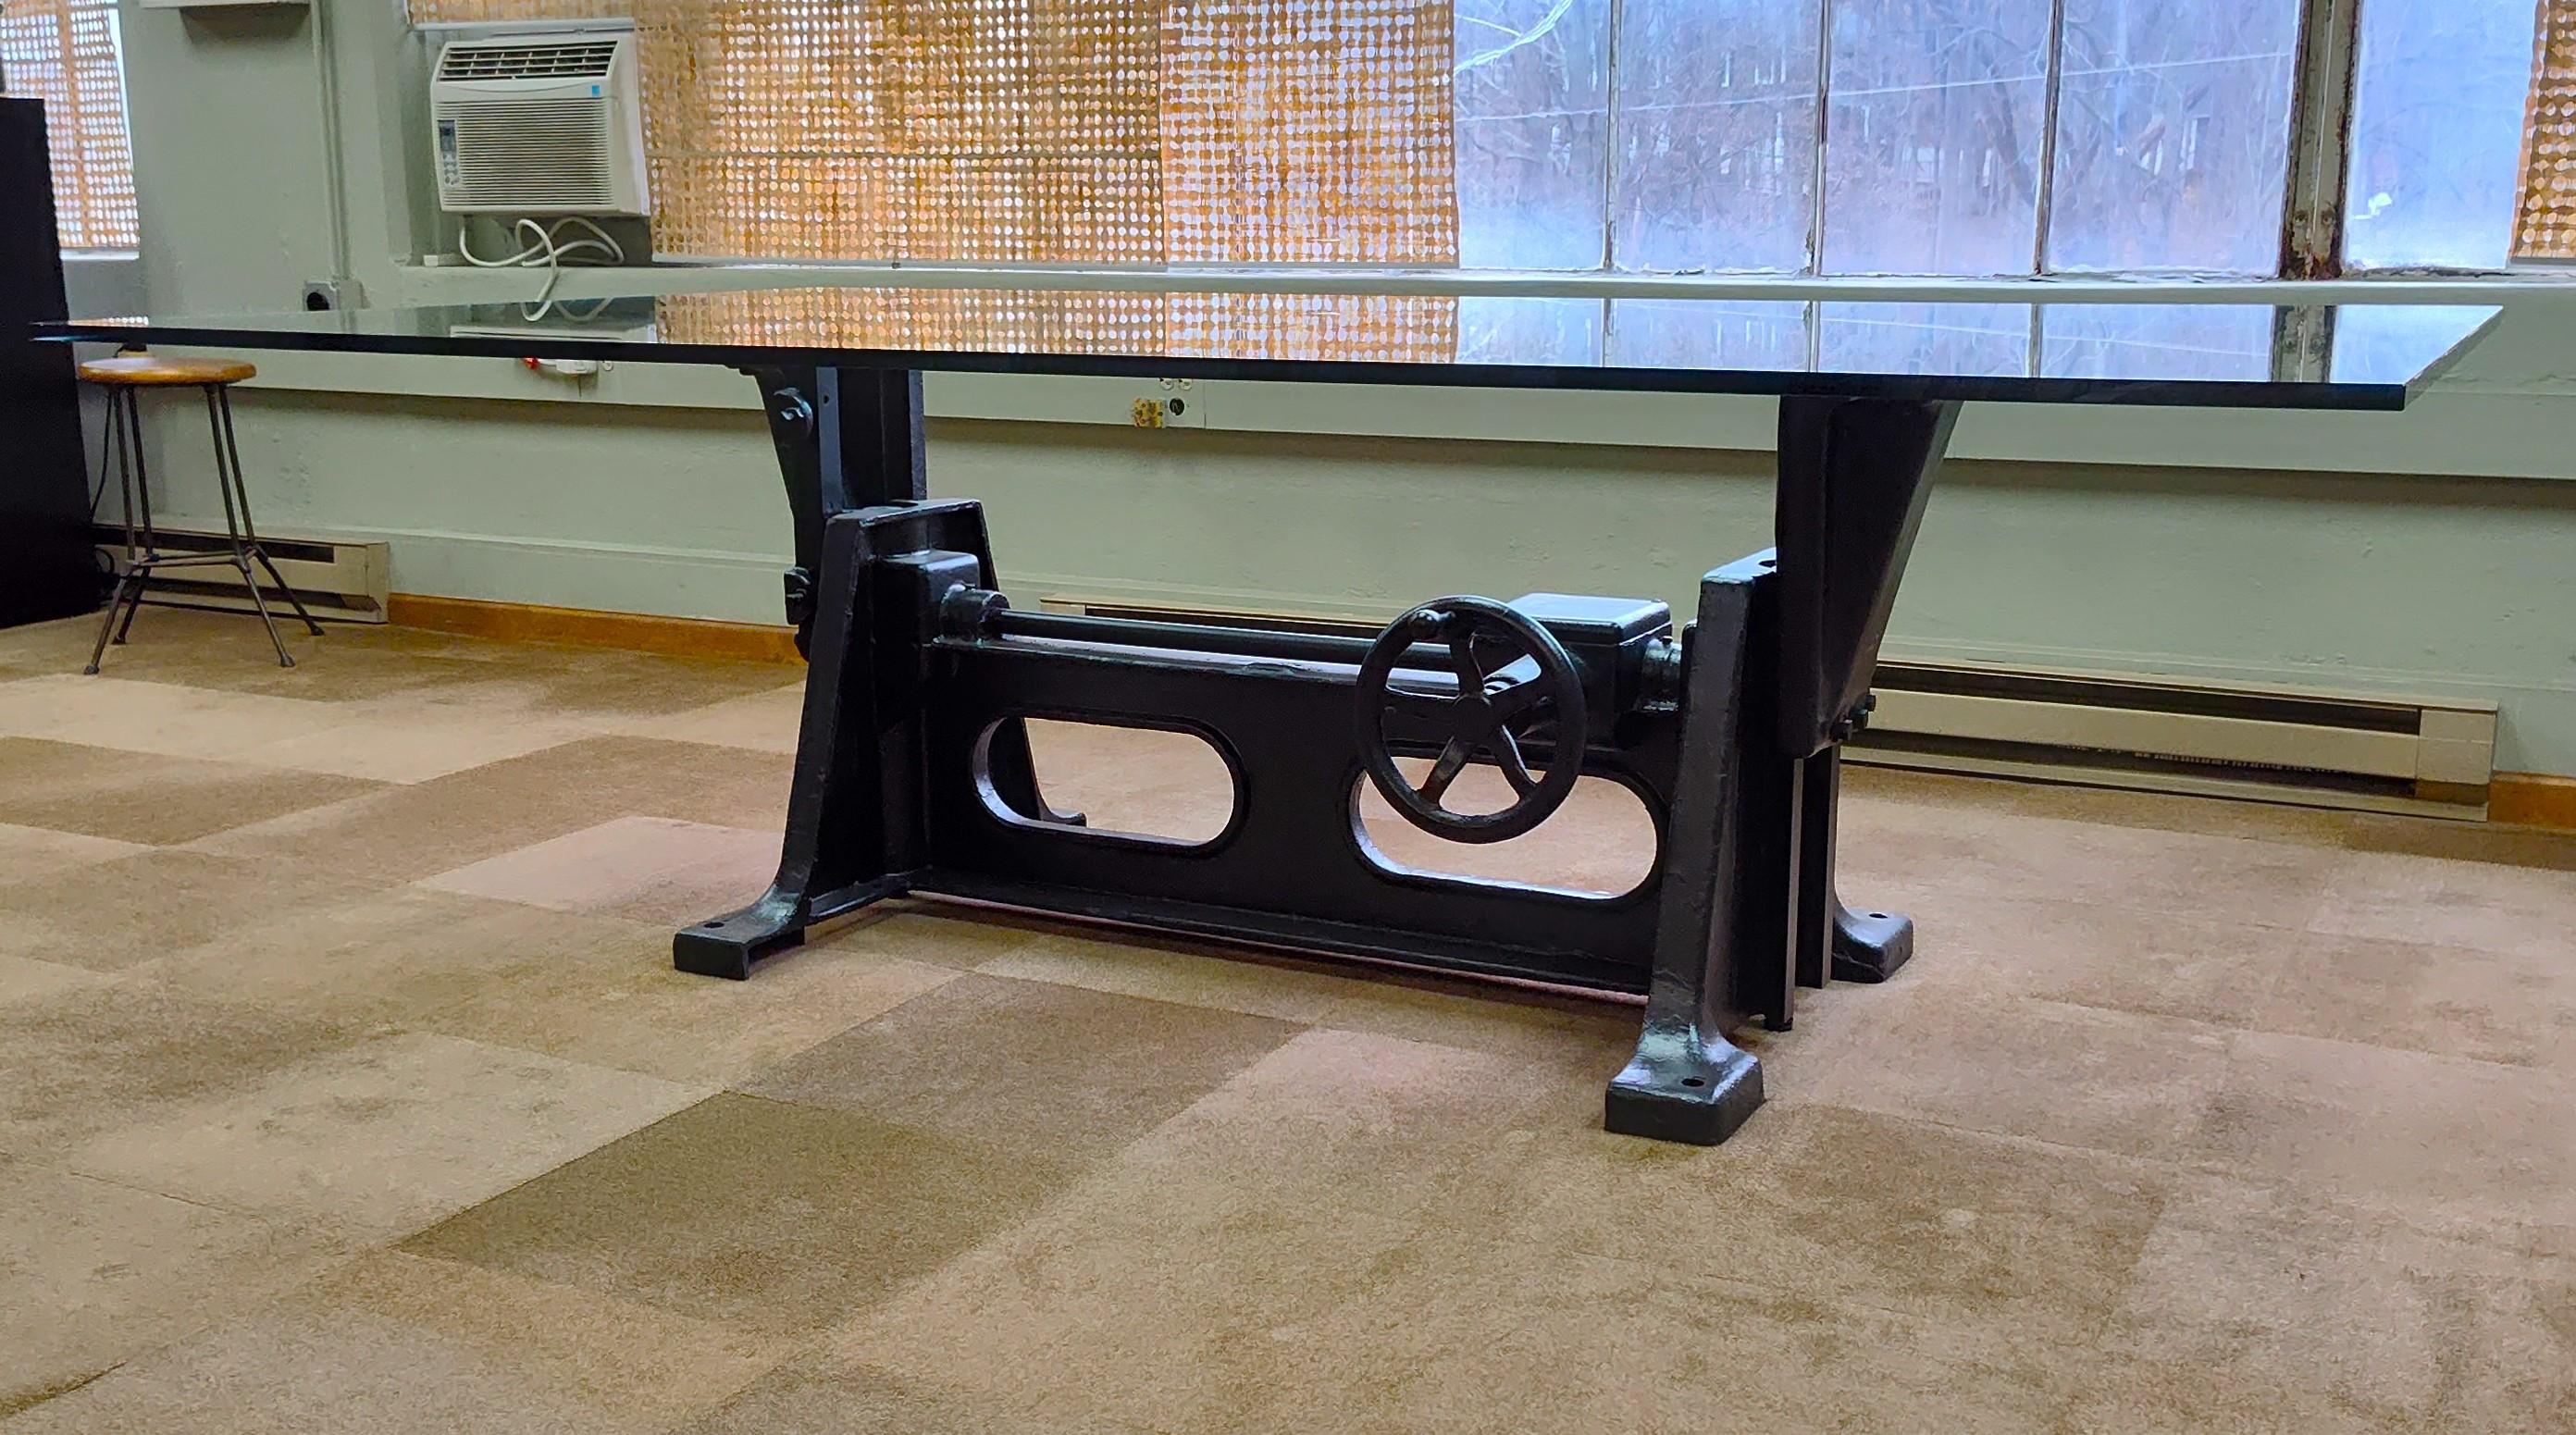 Industrial Crank-Up Table

*Shown with glass but sold as the base only*

Overall Dimensions of the base: 30